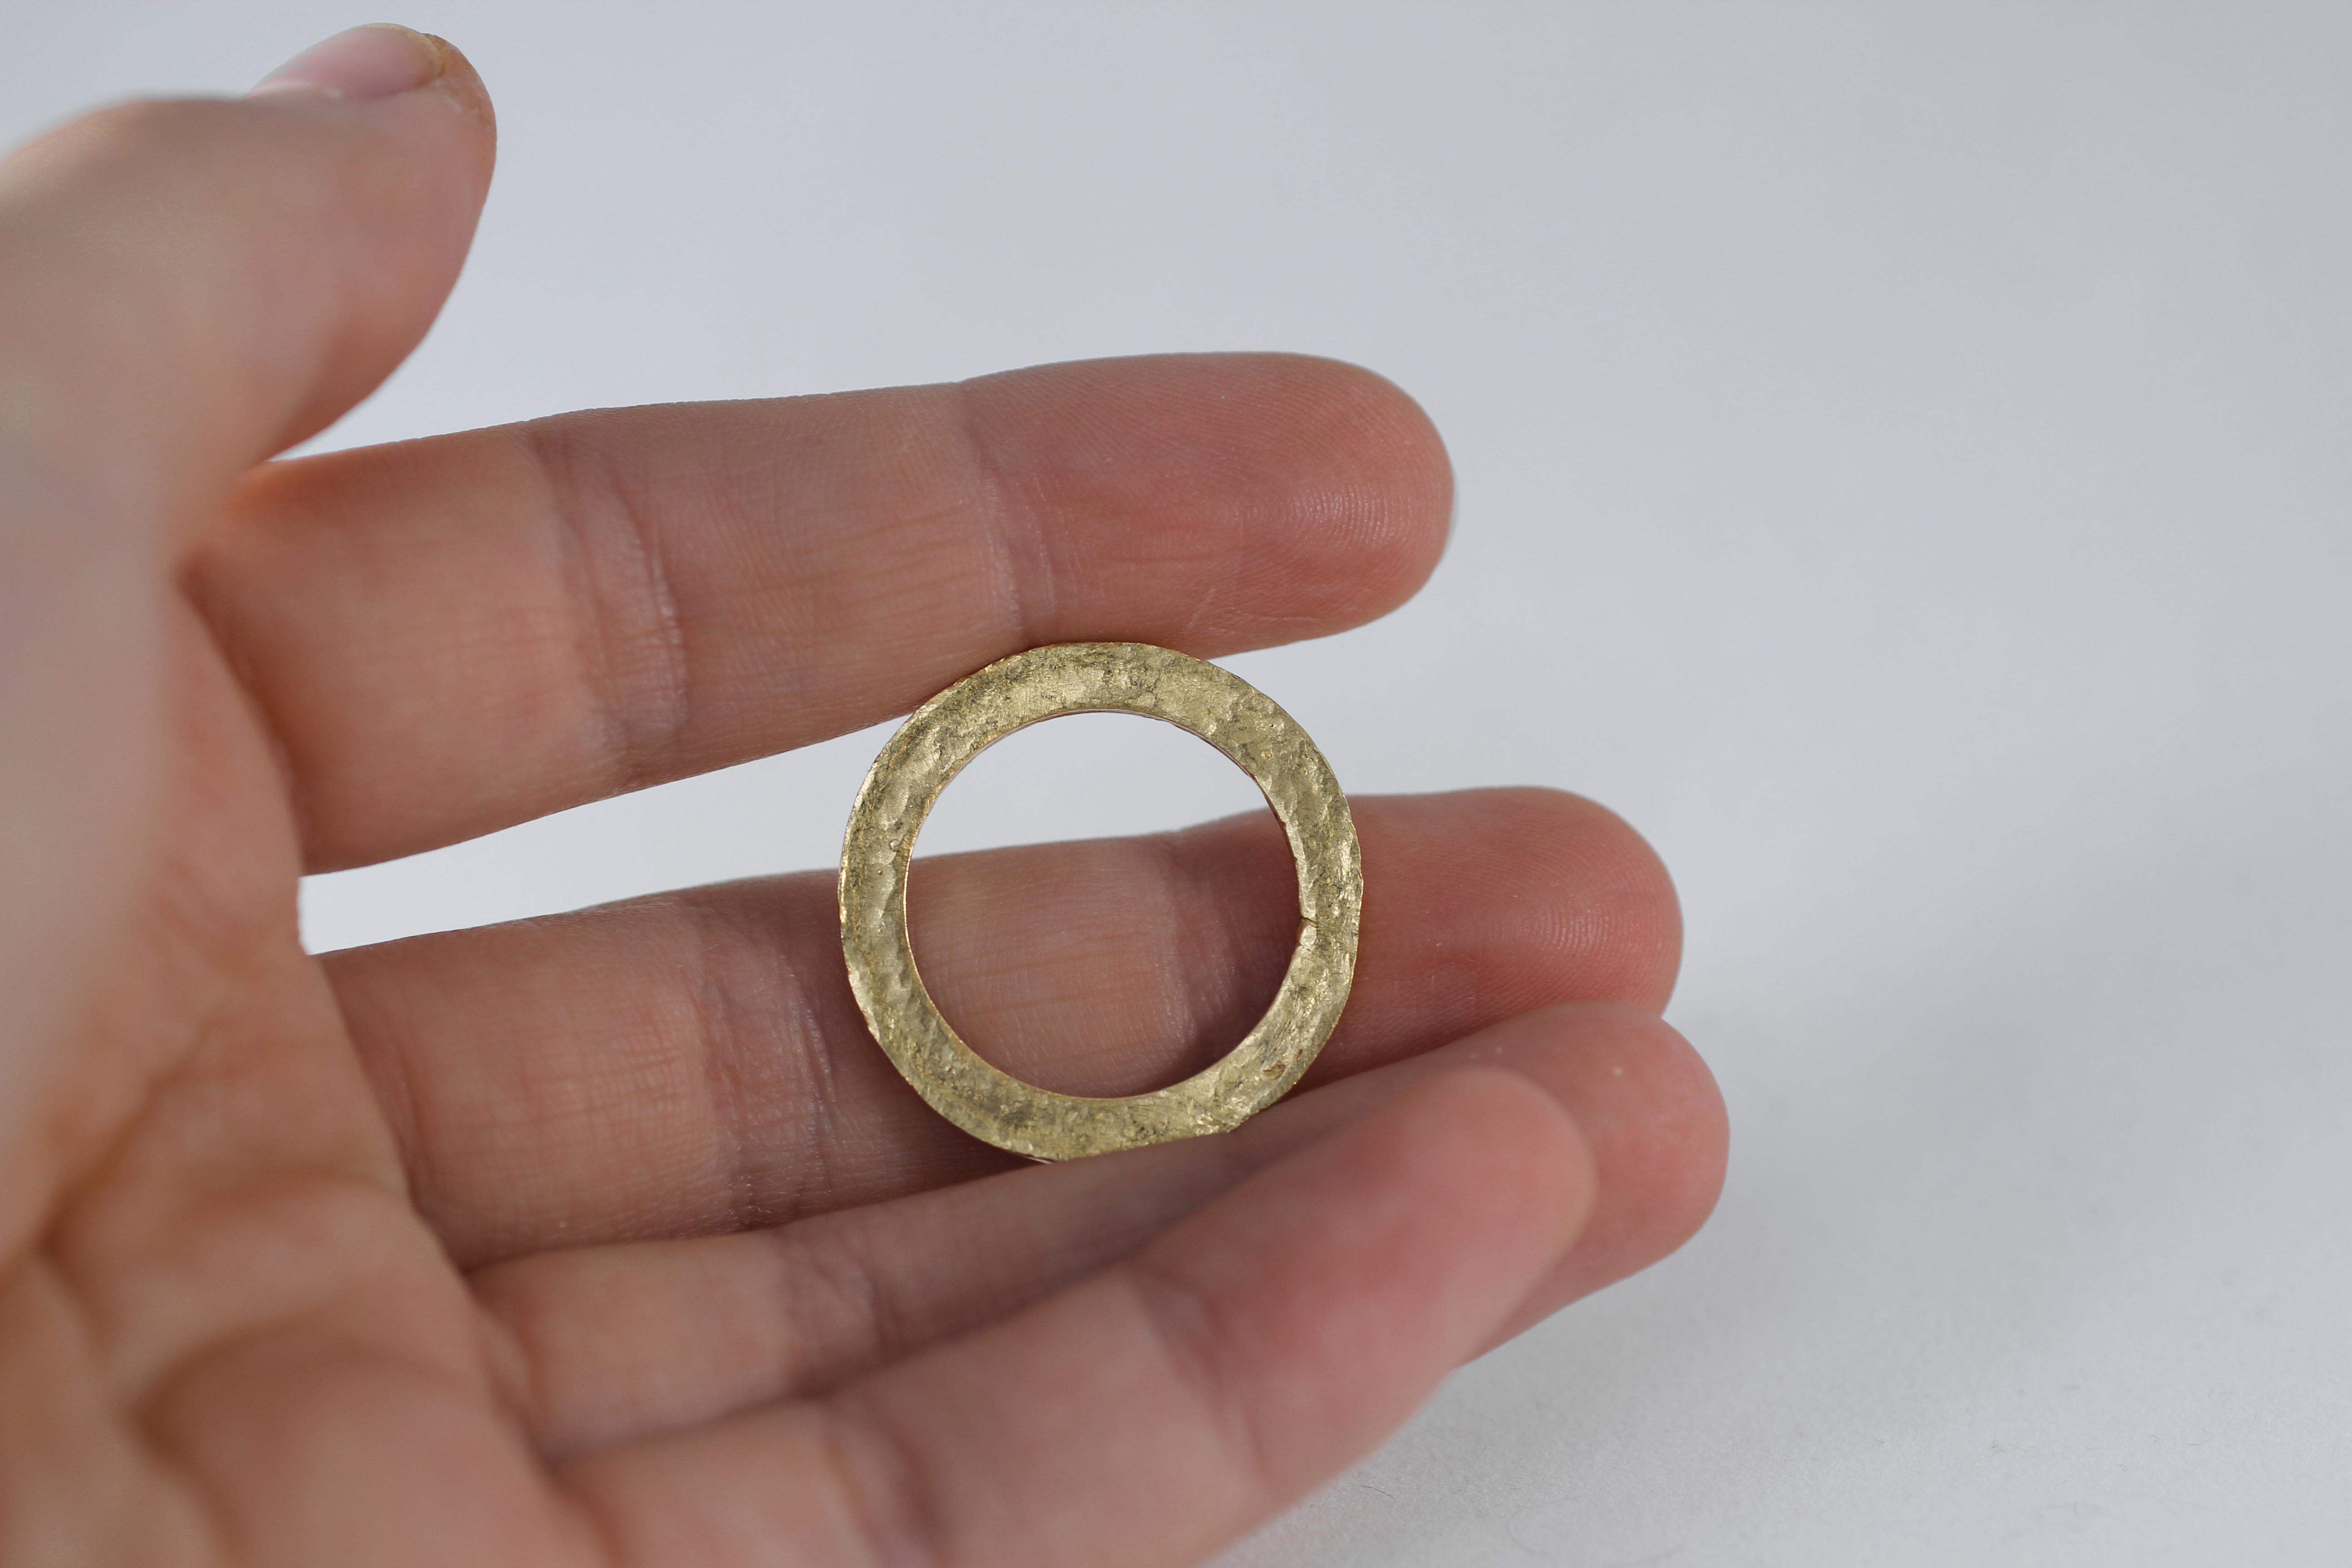 A bridal or wedding band ring in recycled 18k gold. Simplicity Large Disk modern wedding band ring designed and handcrafted by AB Jewelry NYC. Ideal for a man or a woman, unisex. Wear it alone or as a fashionable stacking ring combining it with